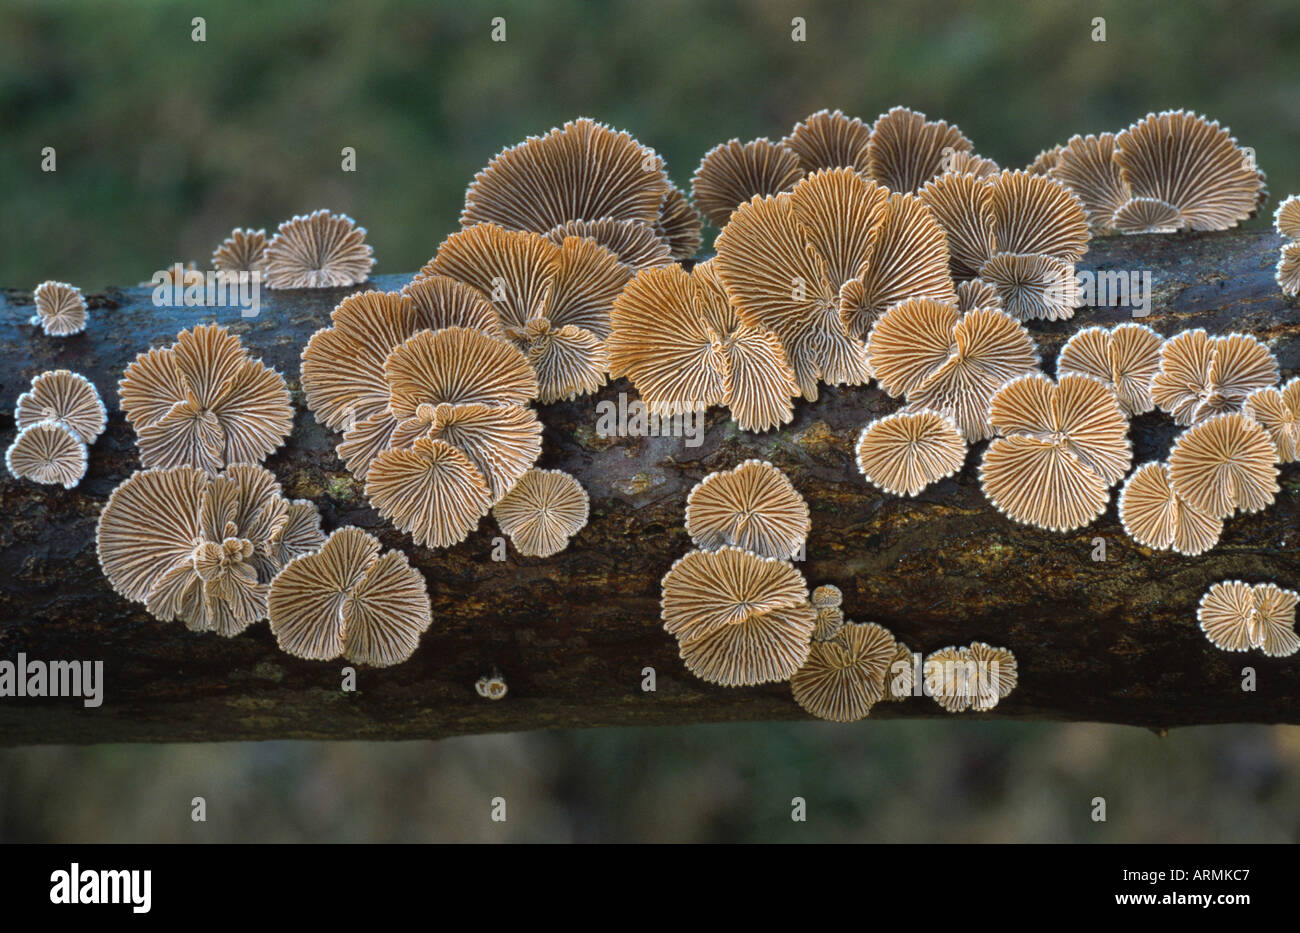 bitter oysterling (Panellus stipticus), underside of the fruiting bodies Stock Photo